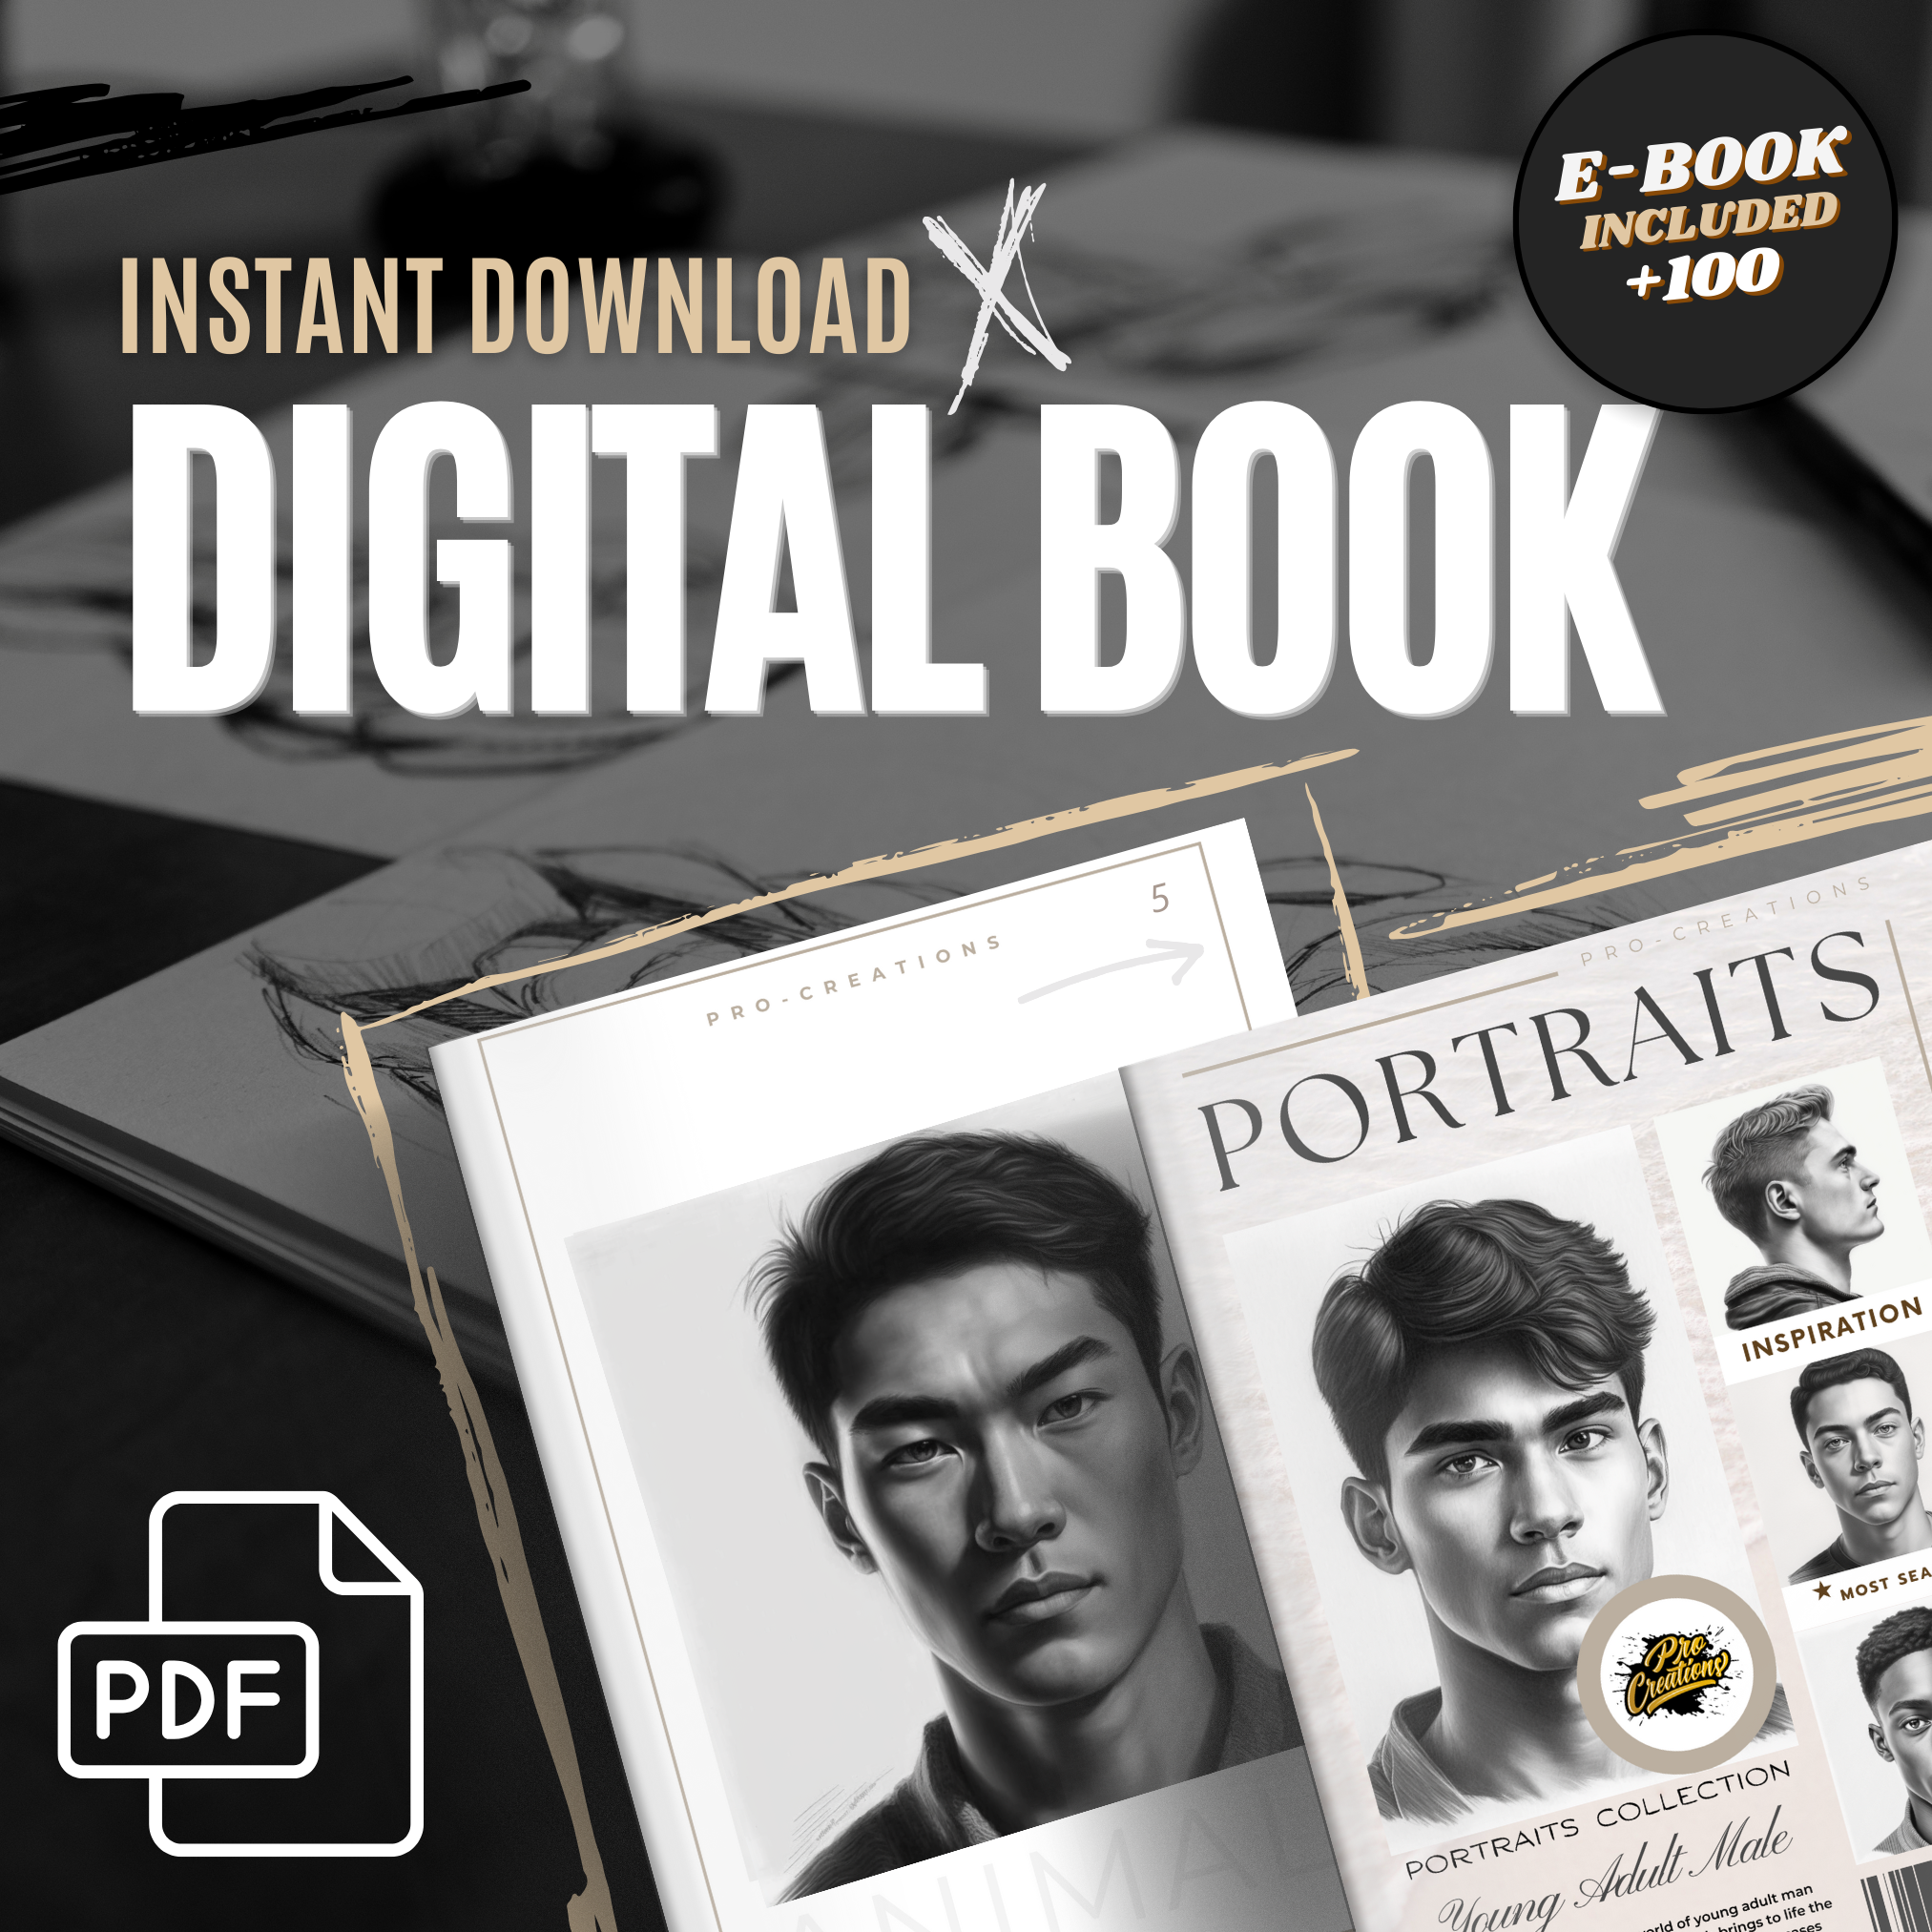 Young Adult Male Portraits Digital Design Collection: 100 Procreate & Sketchbook Images